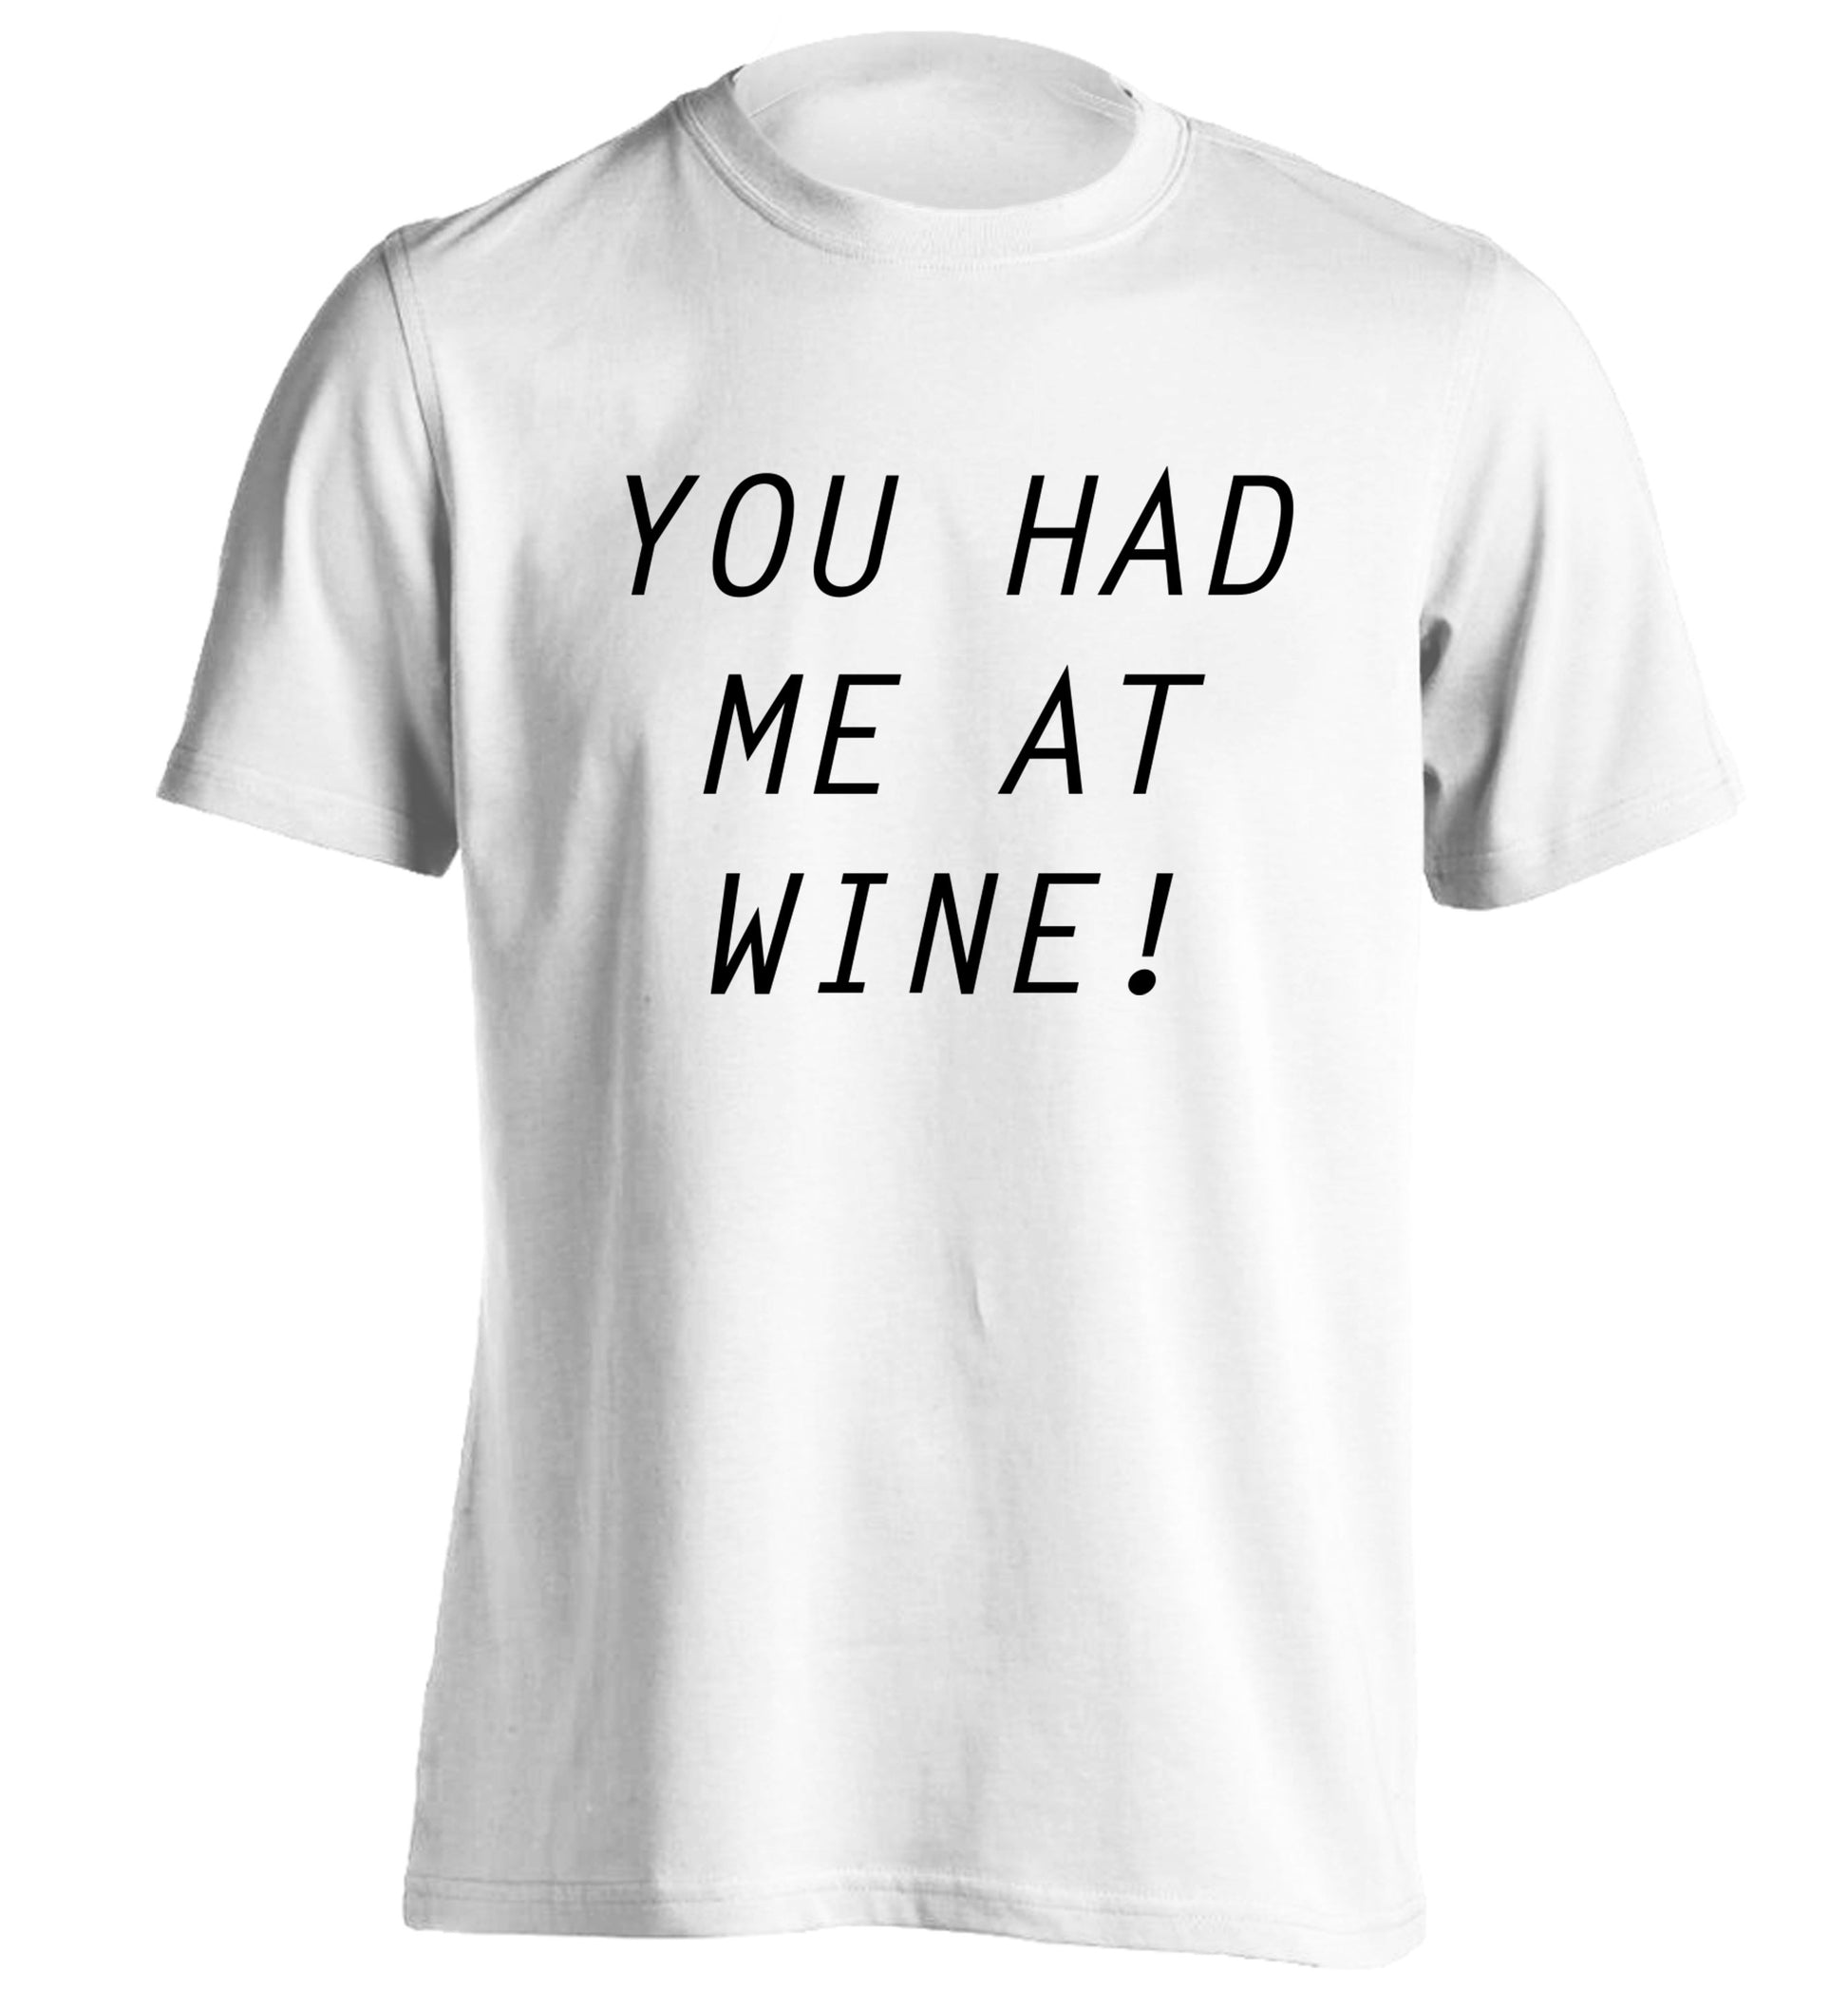 You had me at wine adults unisex white Tshirt 2XL